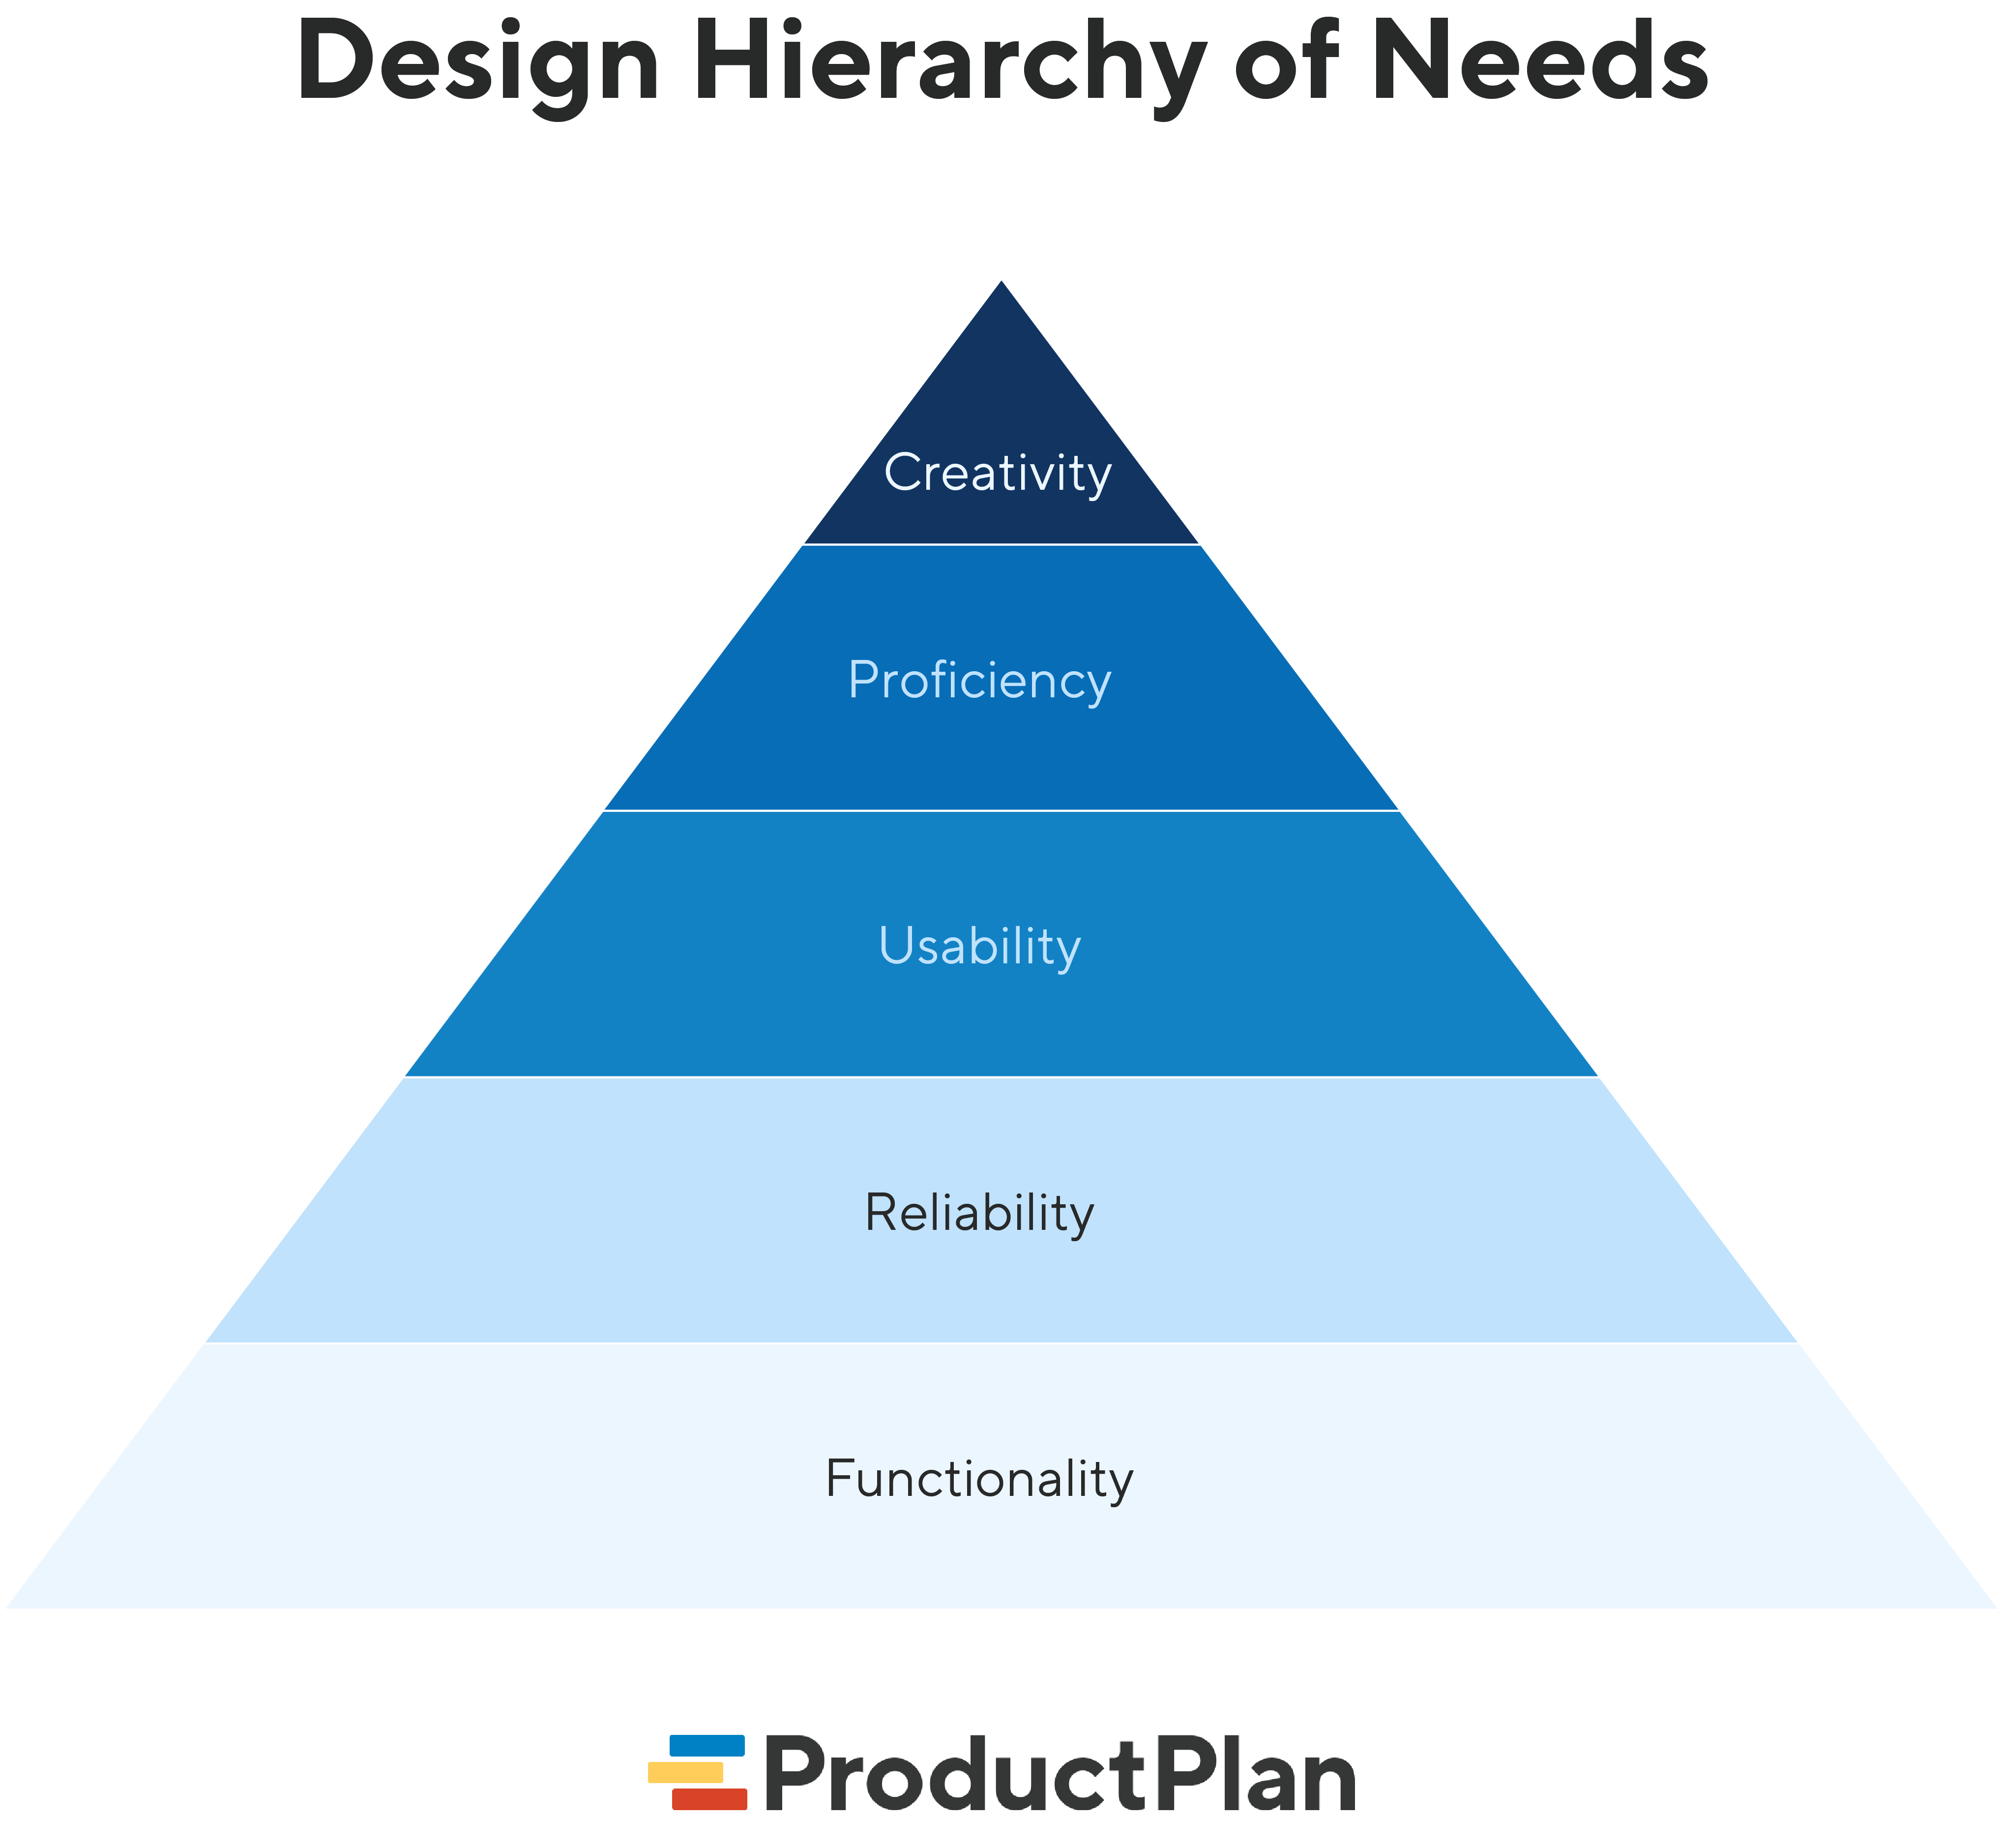 6 Rules of Product Design According to Maslow's Hierarchy of Needs